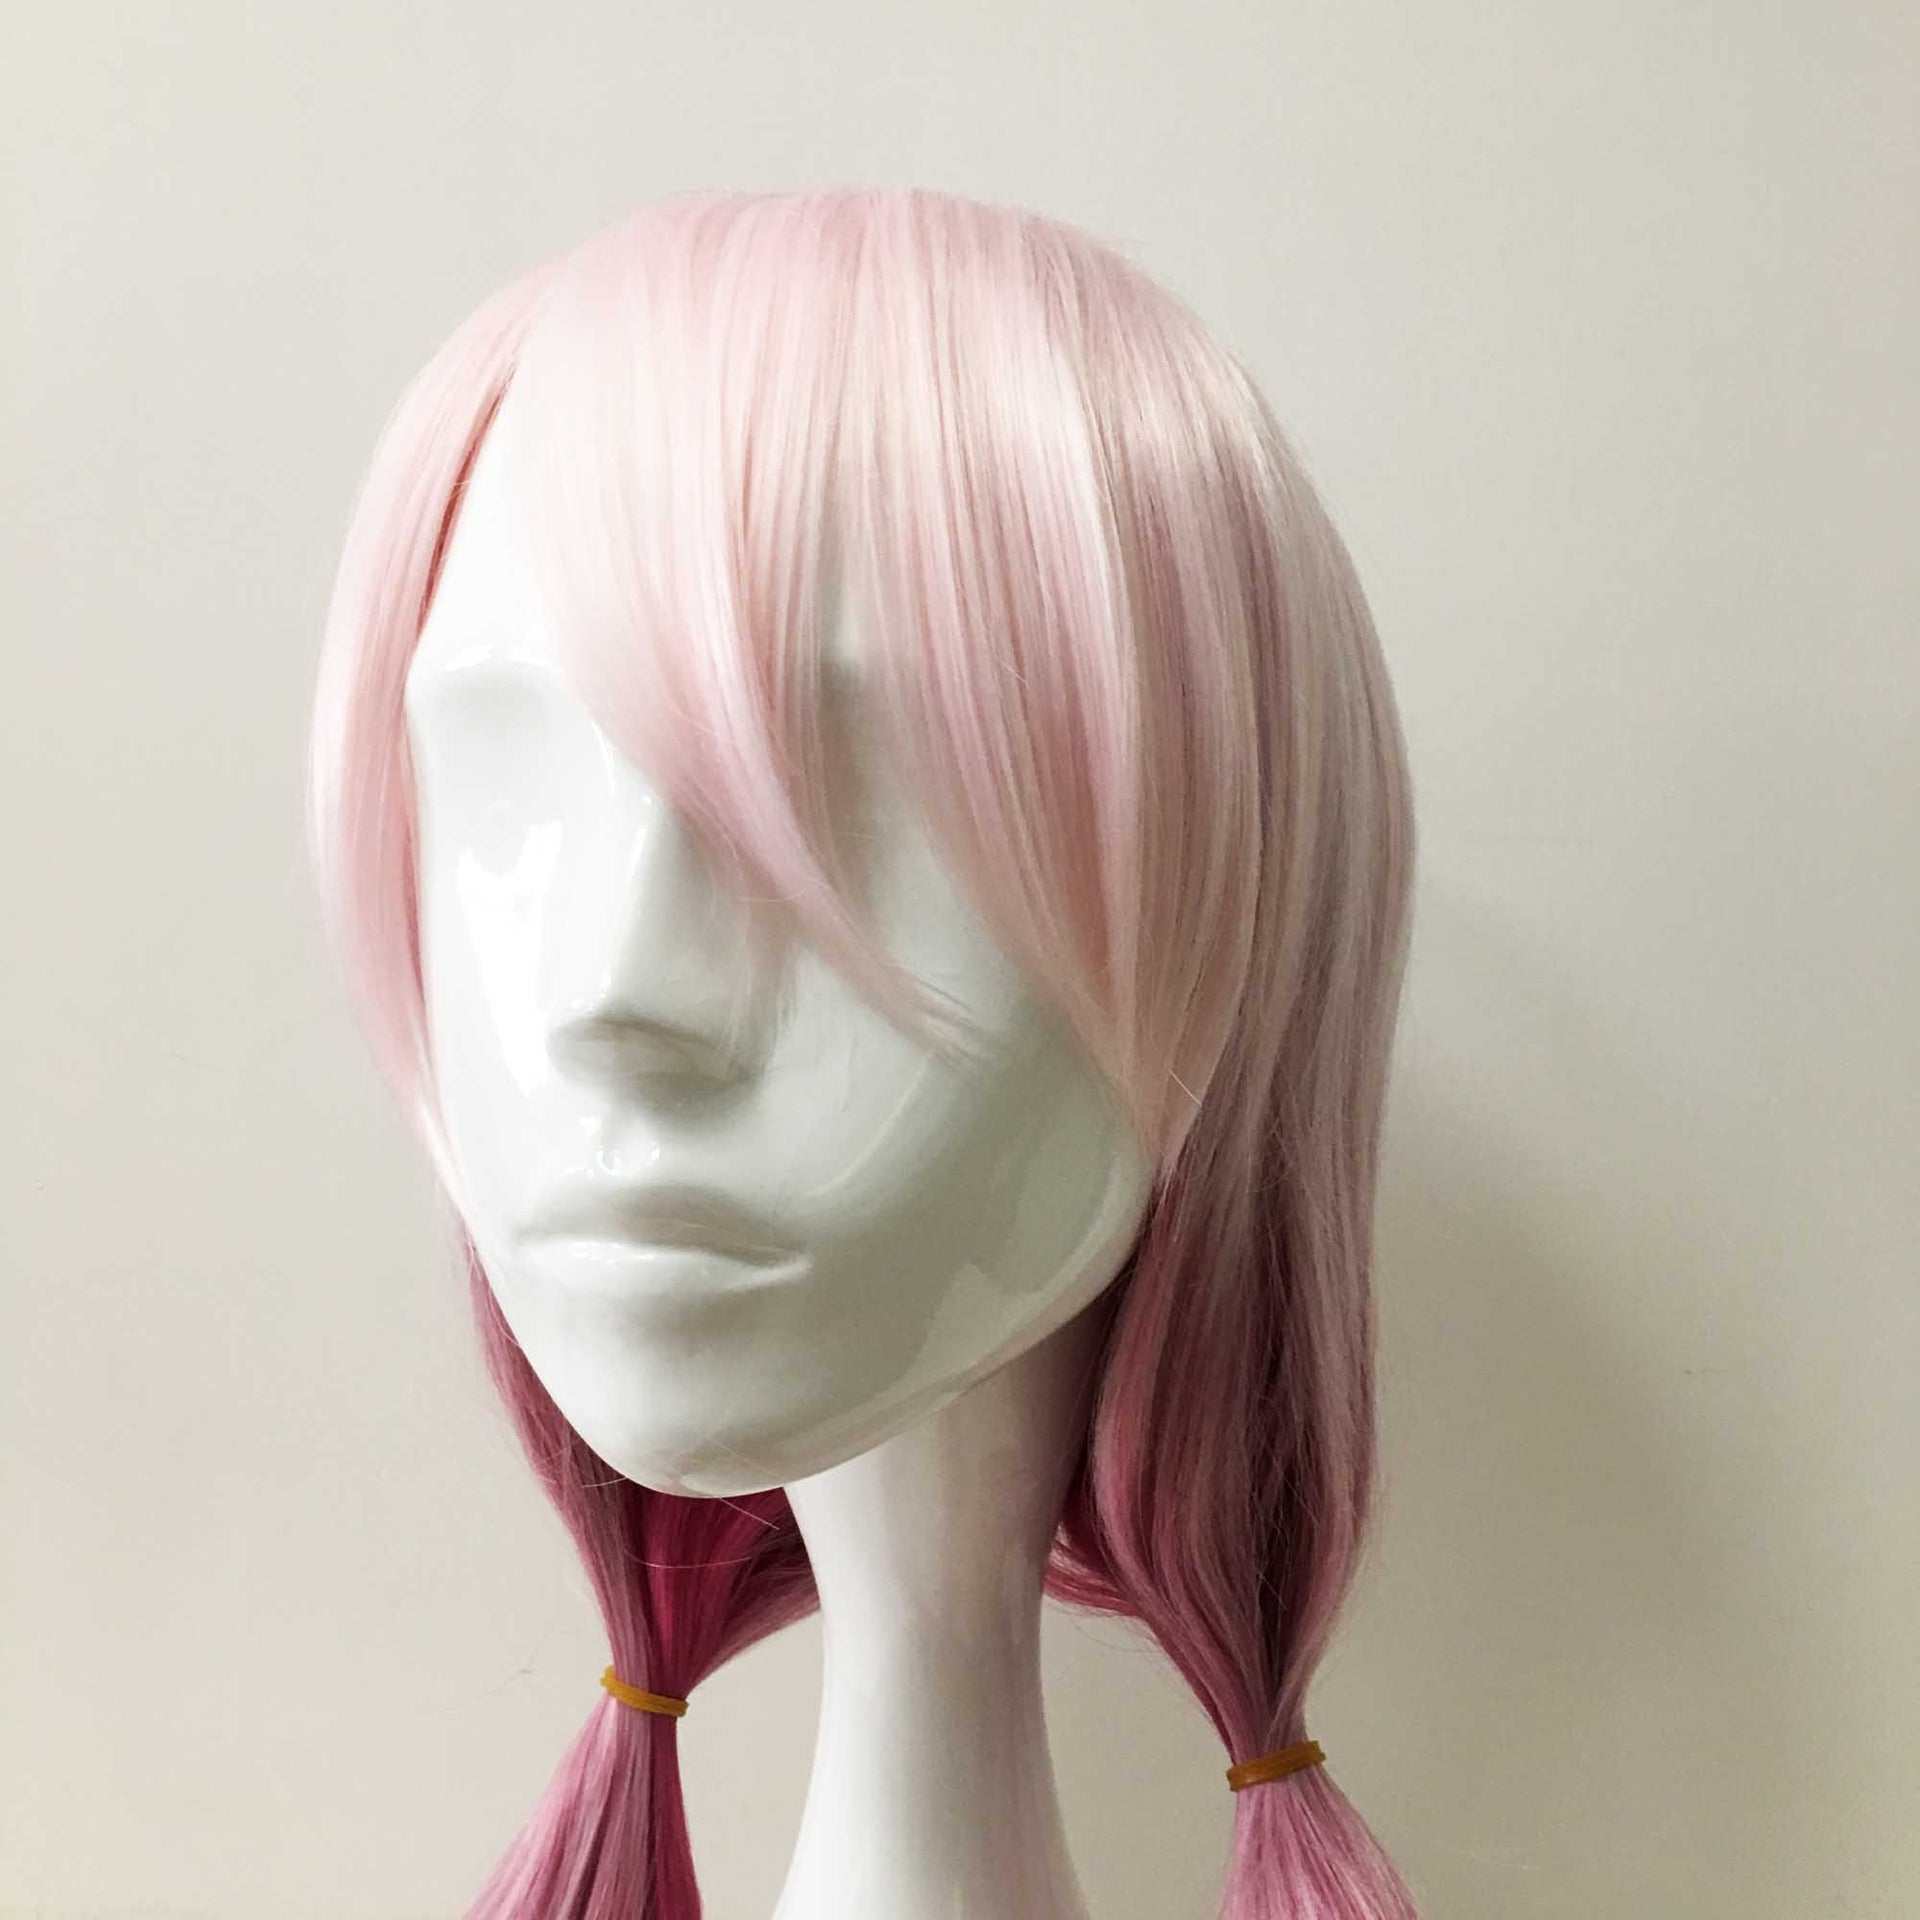 nevermindyrhead Women Pink Ombre Long Straight Ponytails Fringe Bangs Cosplay Wig